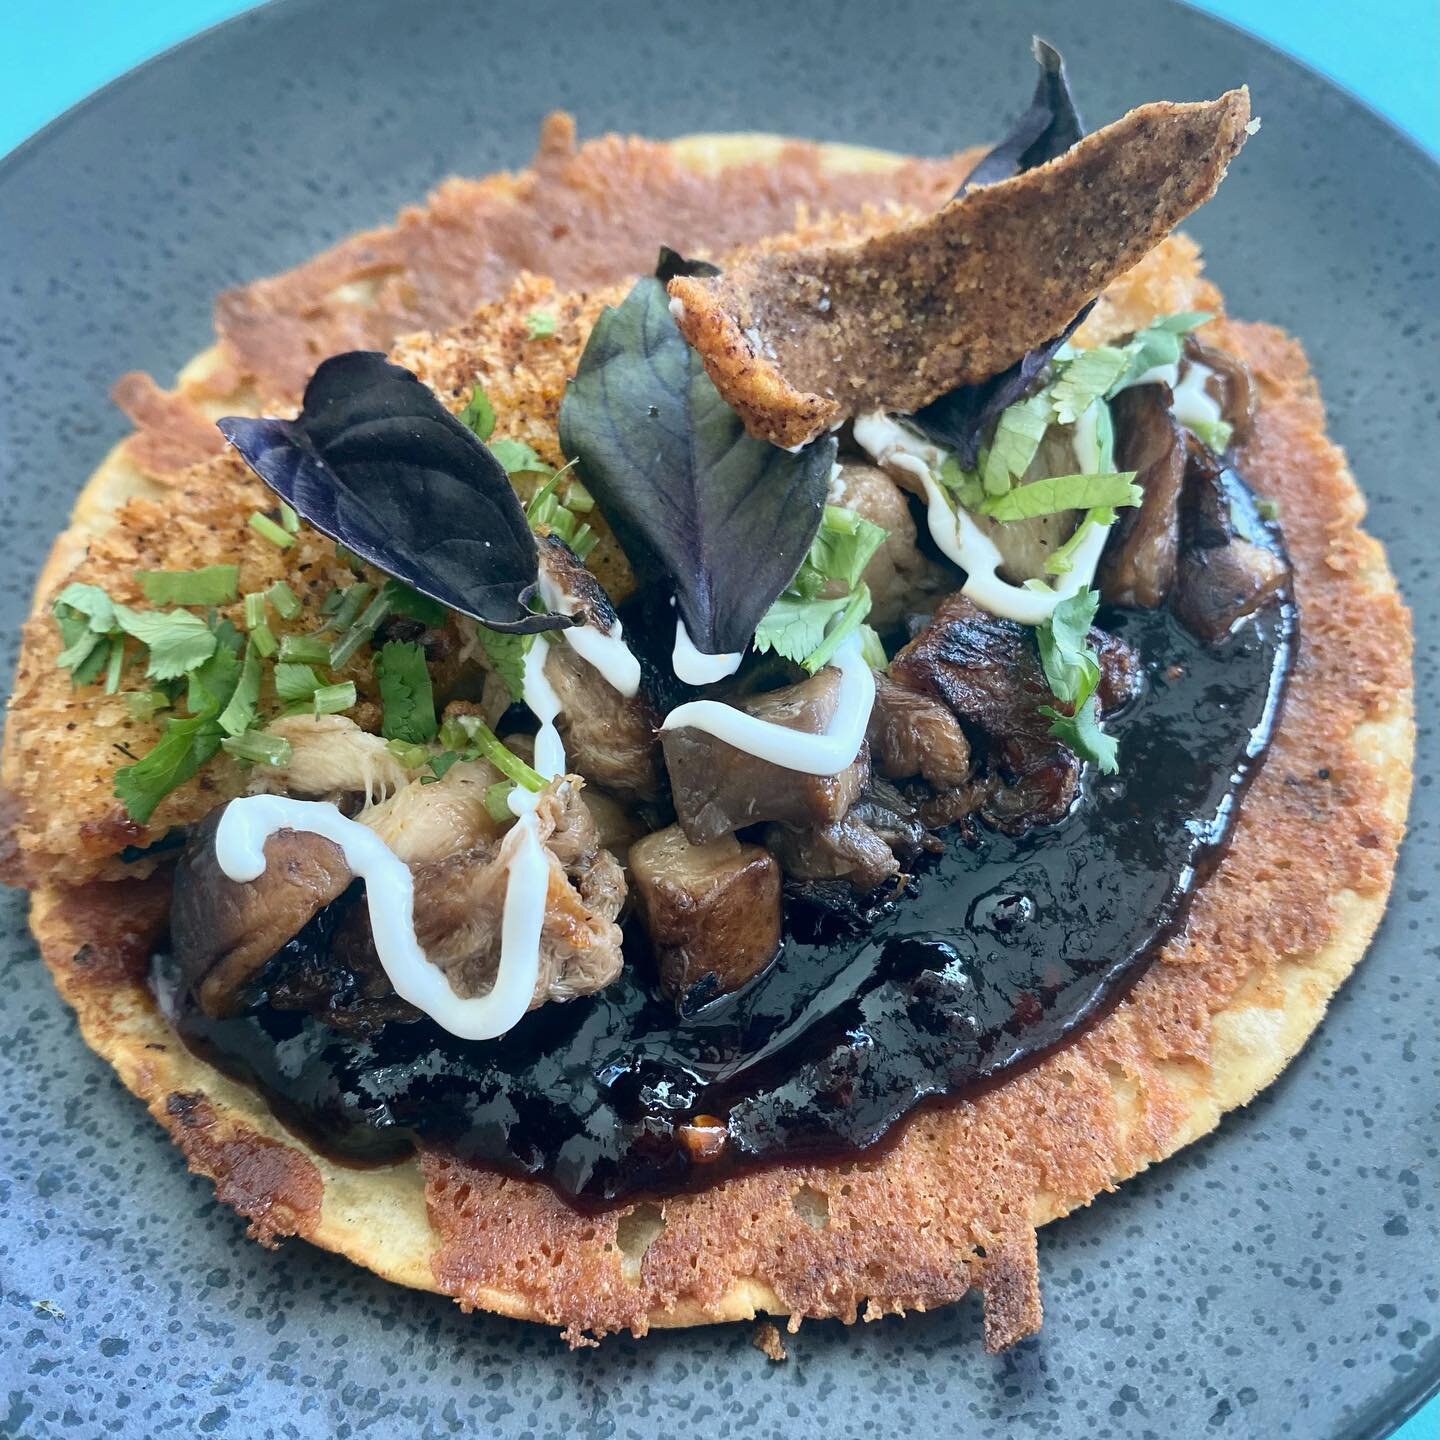 A gift for your tastebuds!

Join us today for a very special taco Tuesday Panko fried eggplant &amp; mushroom mole taco! 

Panko fried eggplant,&nbsp;&nbsp;
+mesquite grilled mushrooms, +Oaxacan cheese, 
+mushroom mole, 
+toasted masa creme, 
+purple